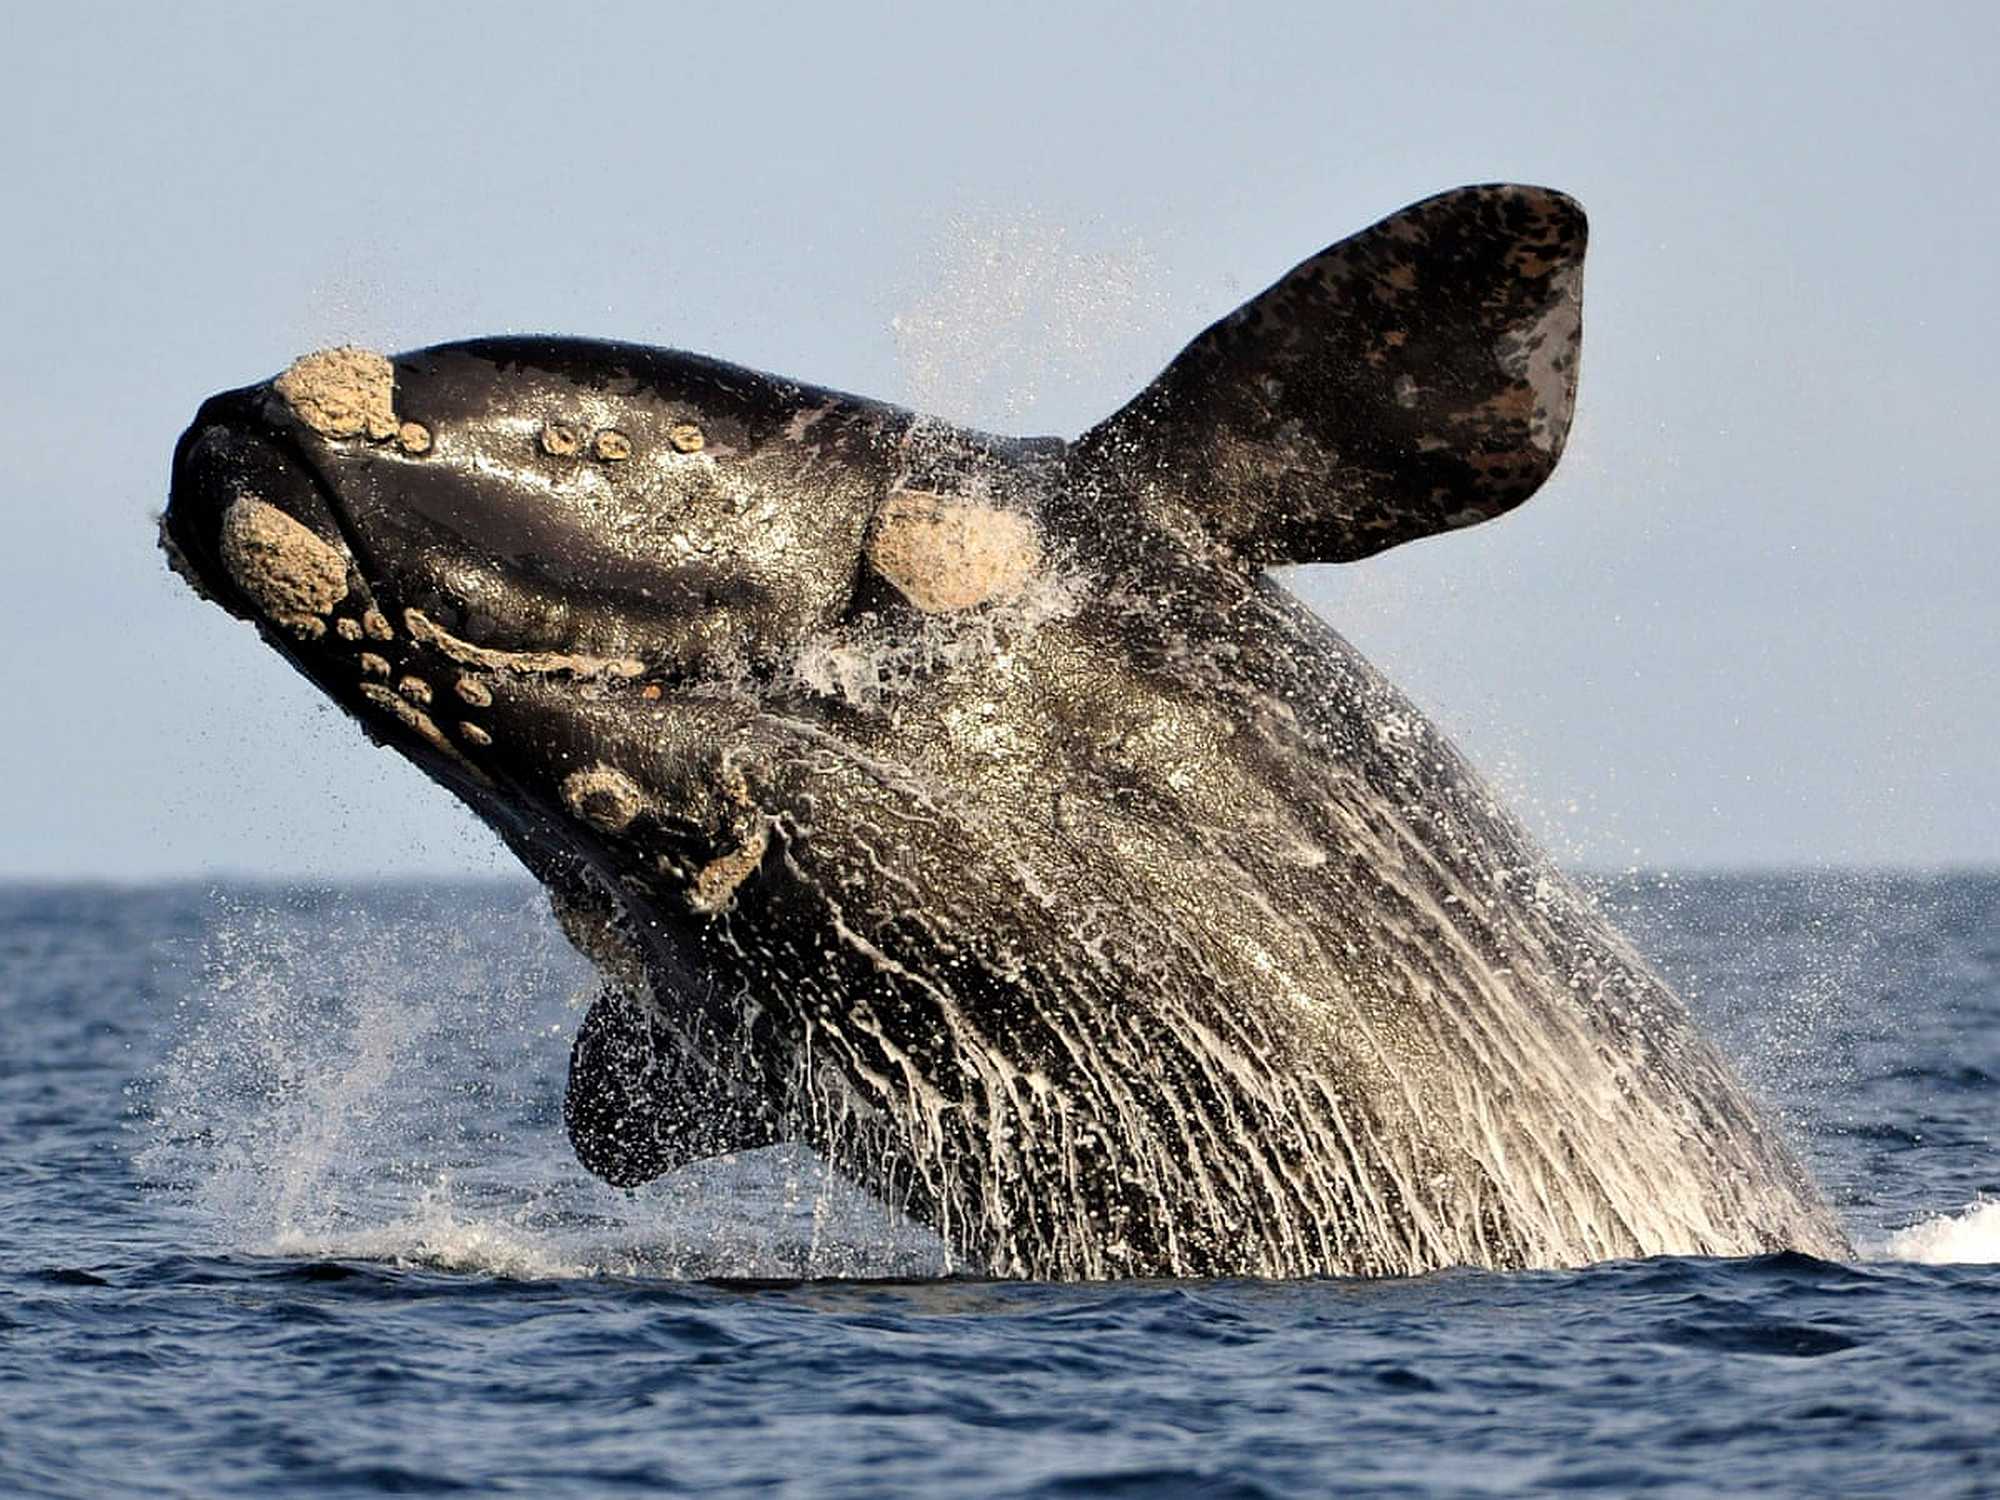 The Southern Atlantic right whale is back in the Brazilian coast.